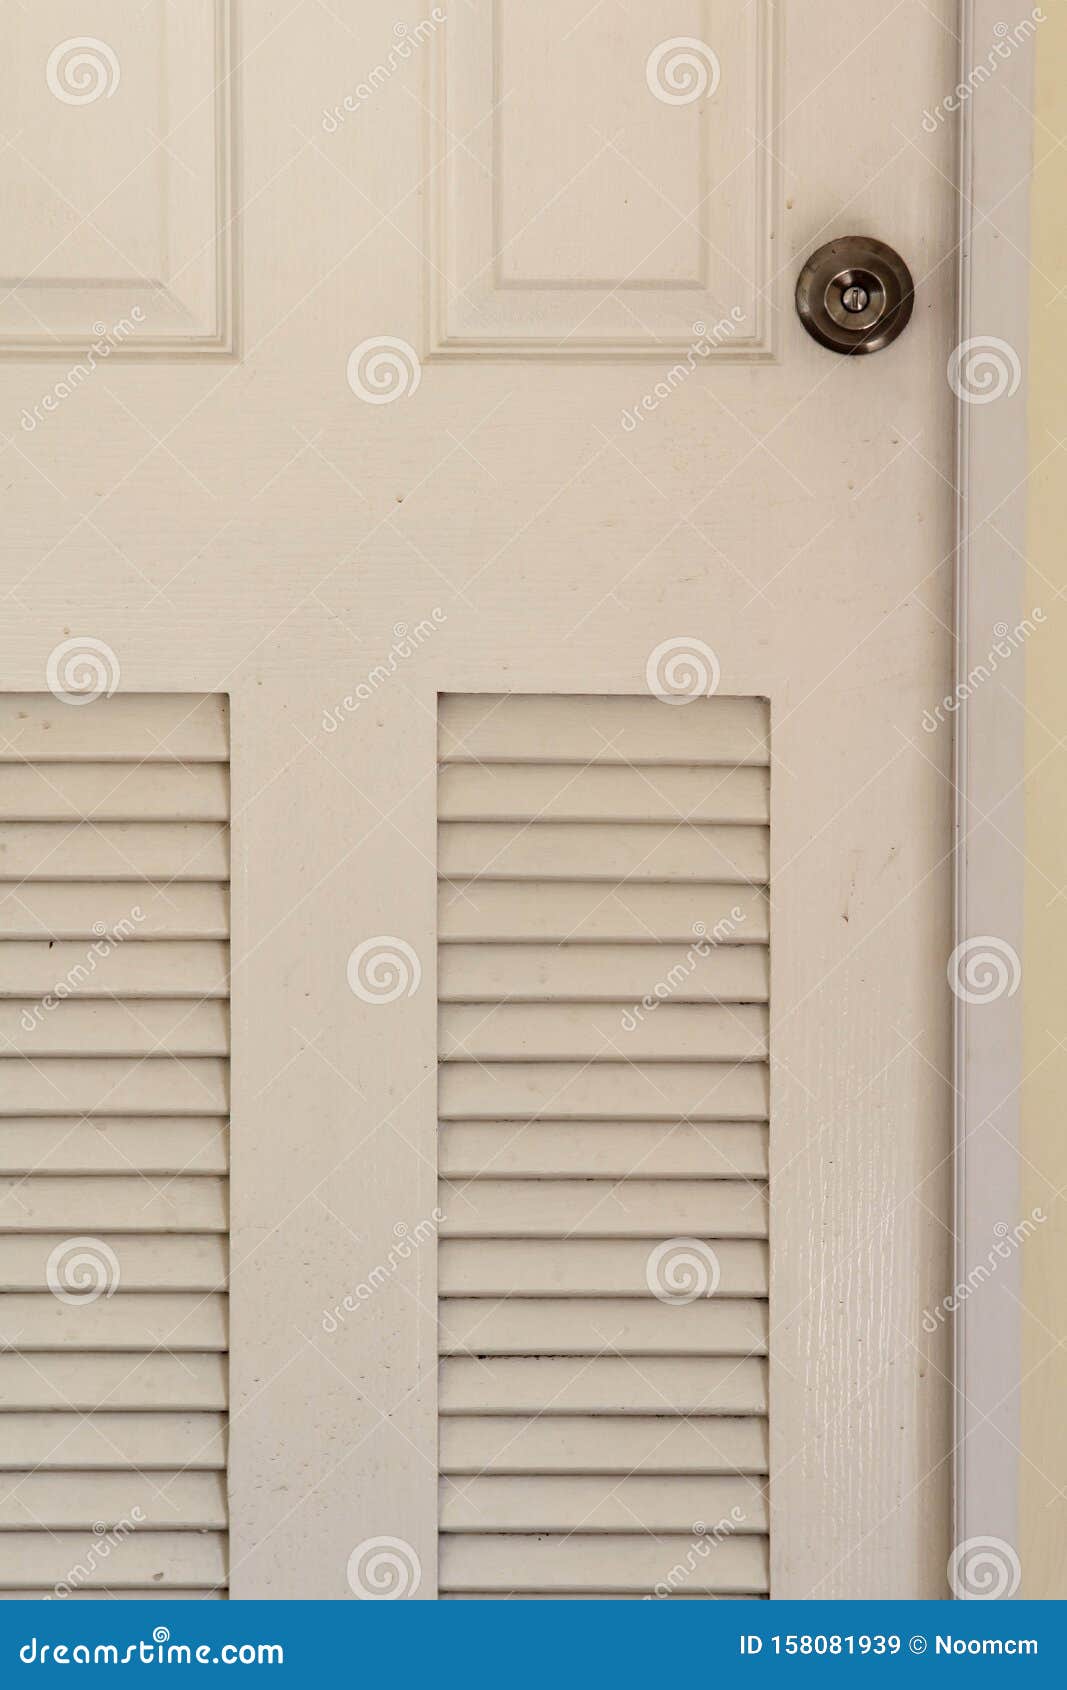 Bathroom Door With Louver Stock Image Image Of Louver 158081939